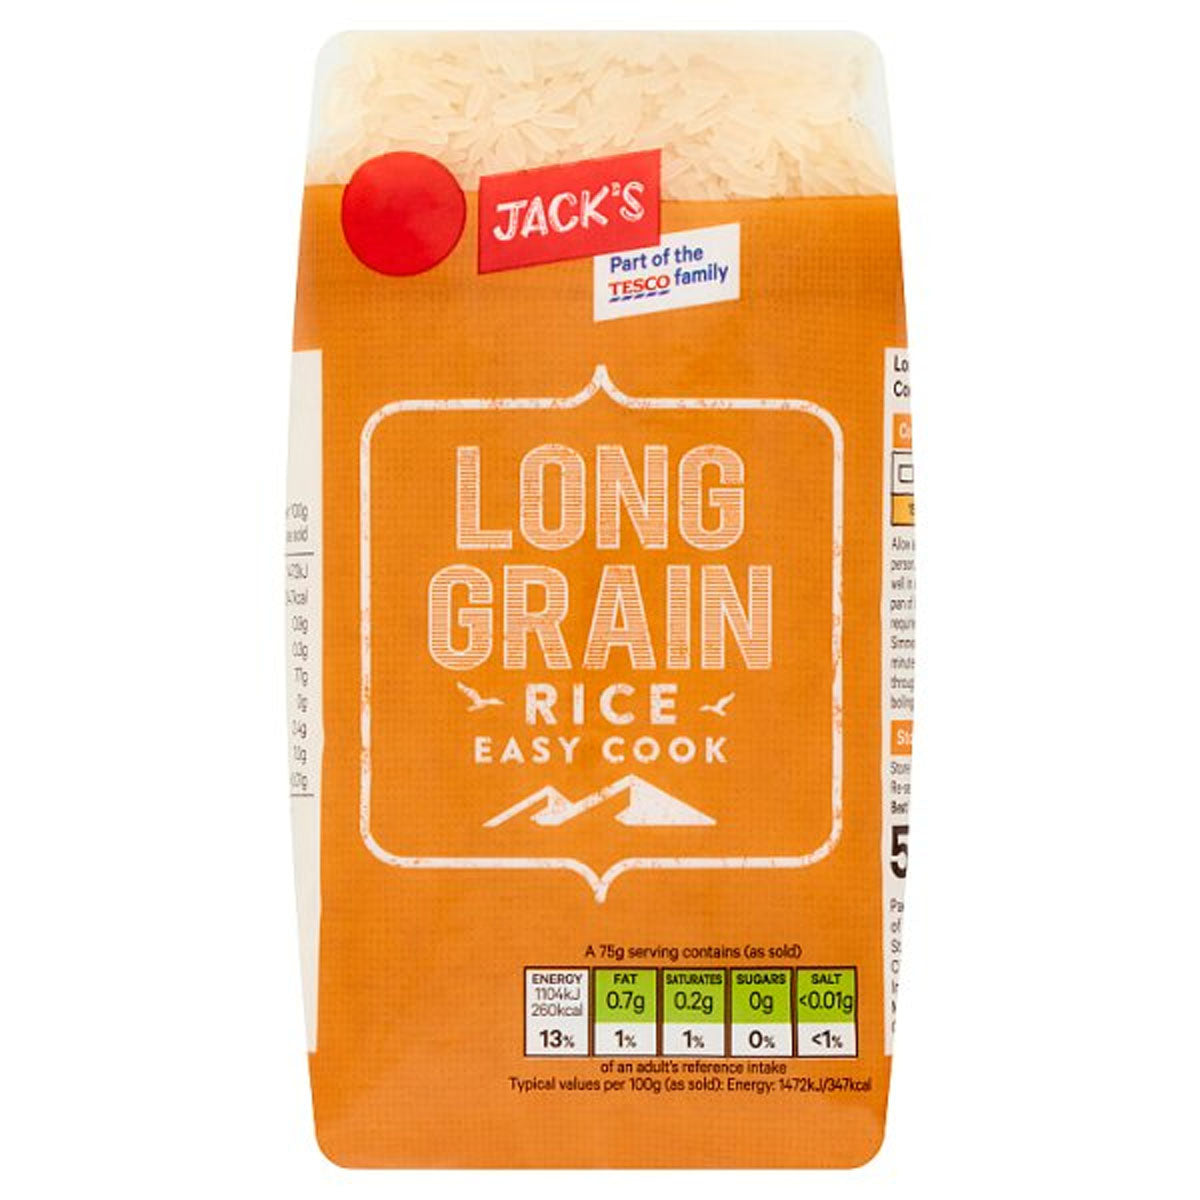 A bag of Jacks - Long Grain Rice - 500g on a white background.